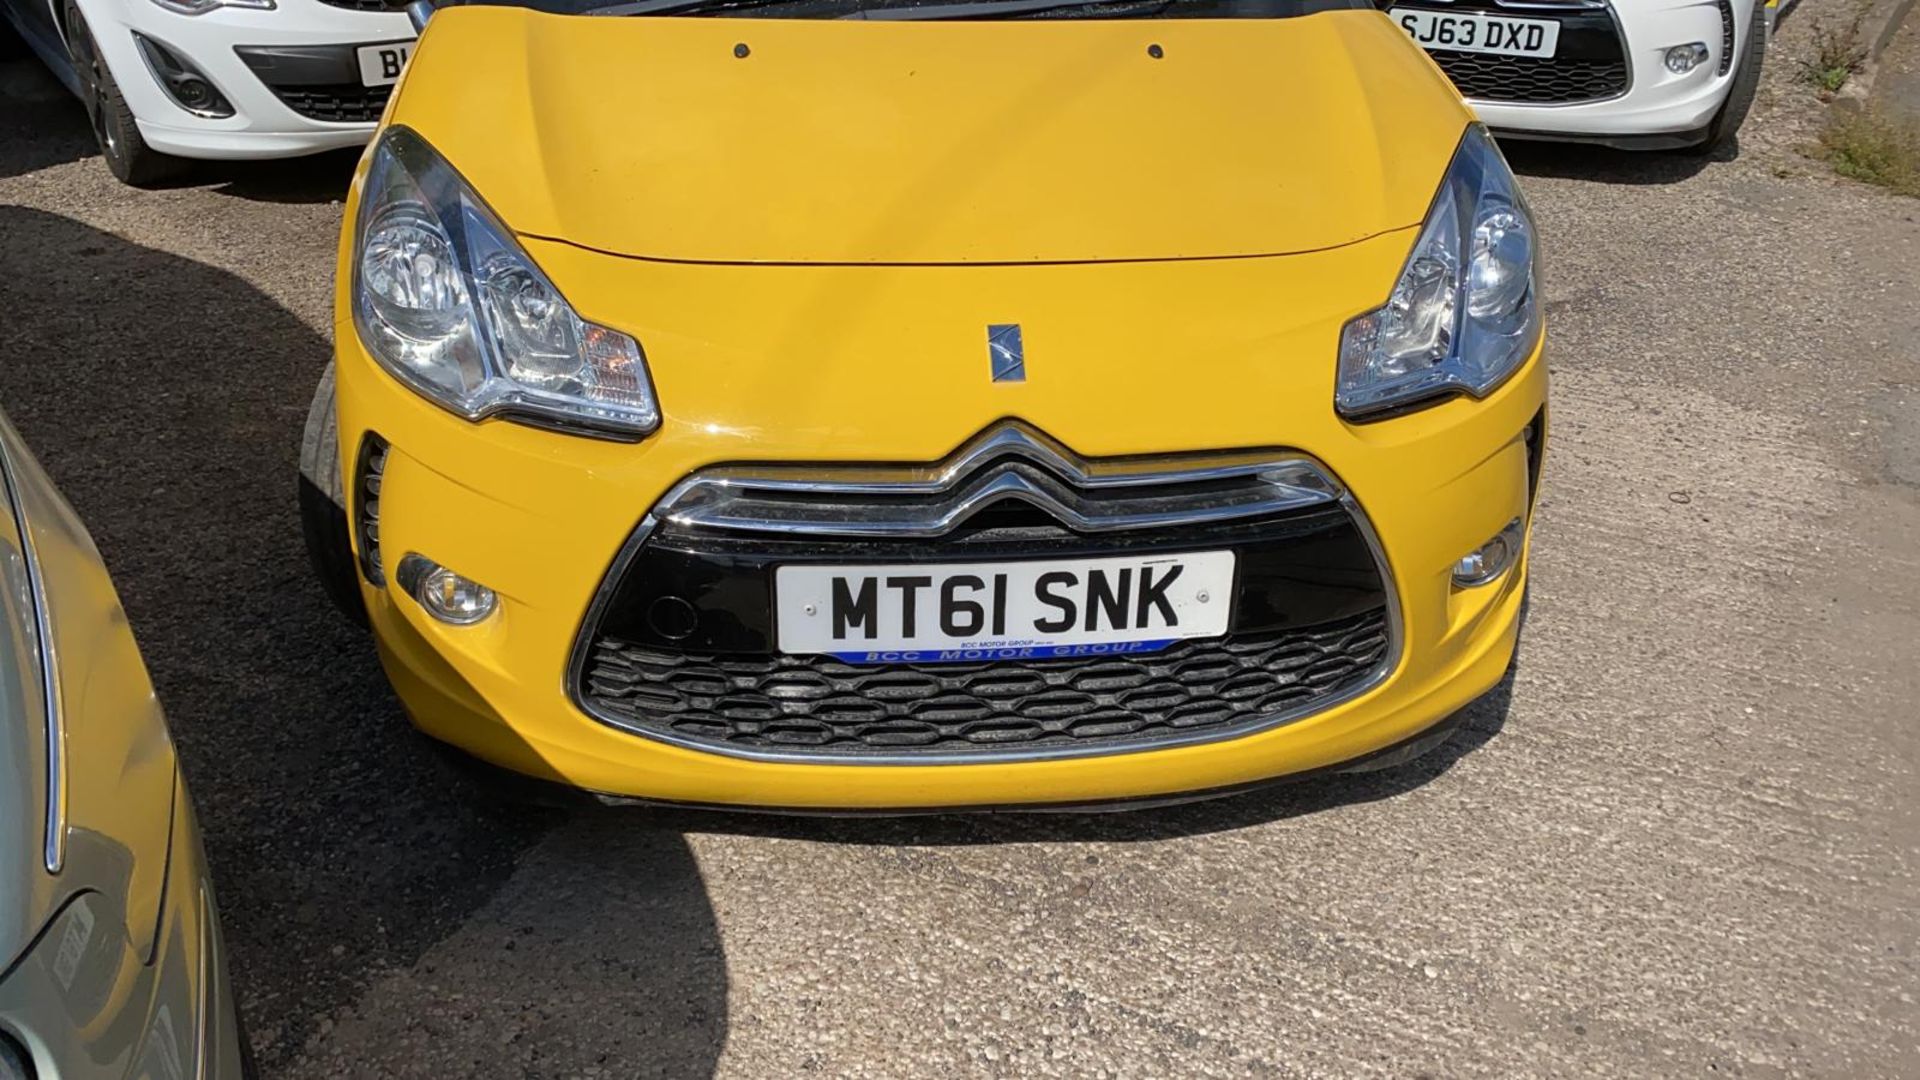 2011/61 REG CITROEN DS3 DSTYLE + E-HDI 1.6 DIESEL 3 DOOR HATCHBACK YELLOW, SHOWING 1 FORMER KEEPER - Image 2 of 6